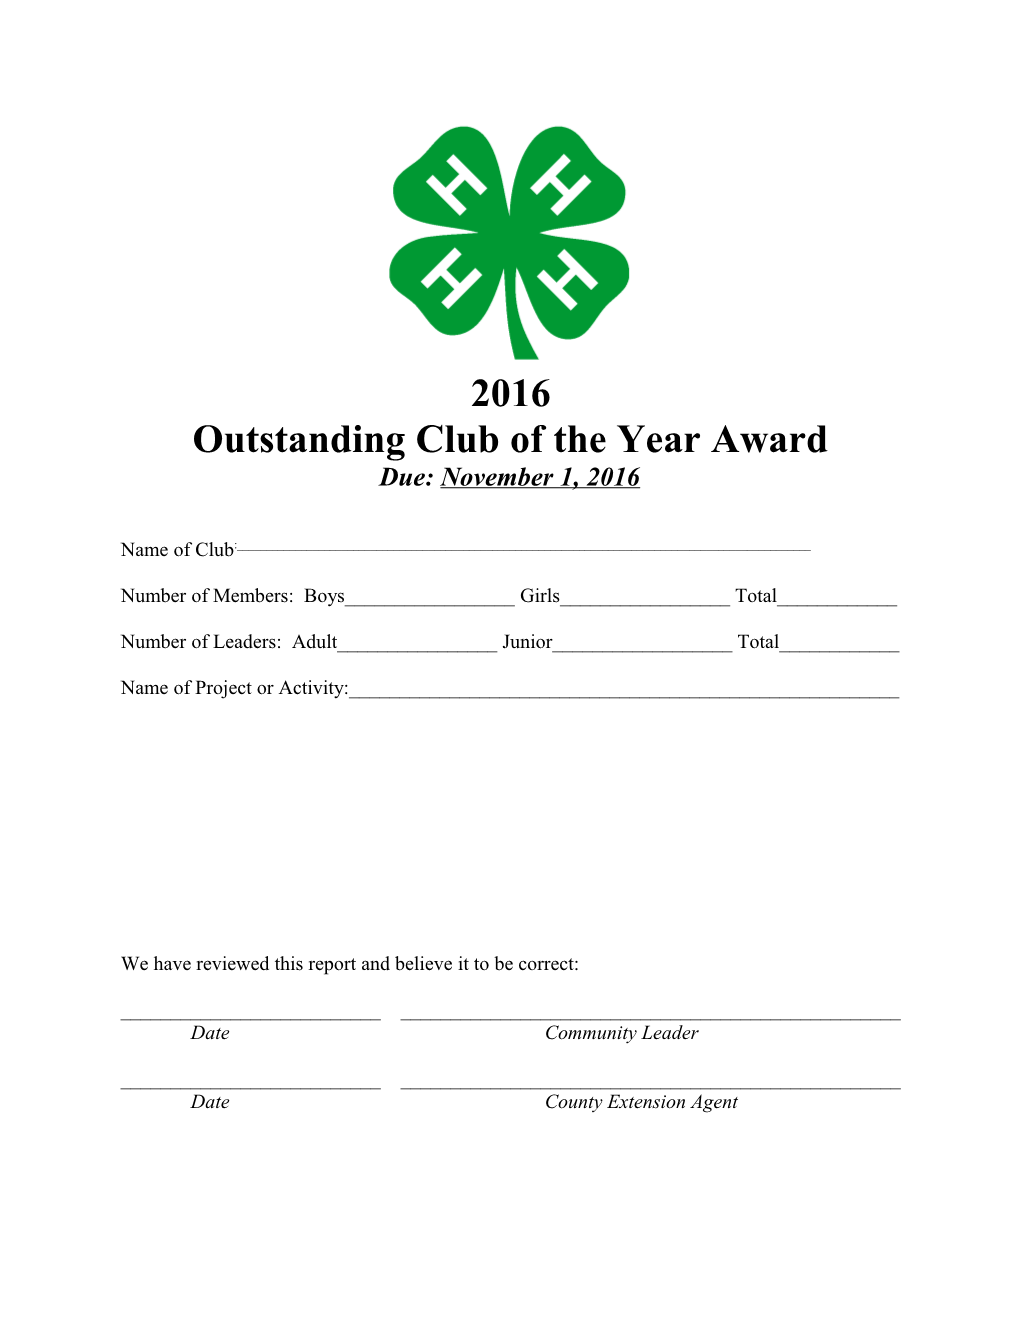 Outstanding Club of the Year Award